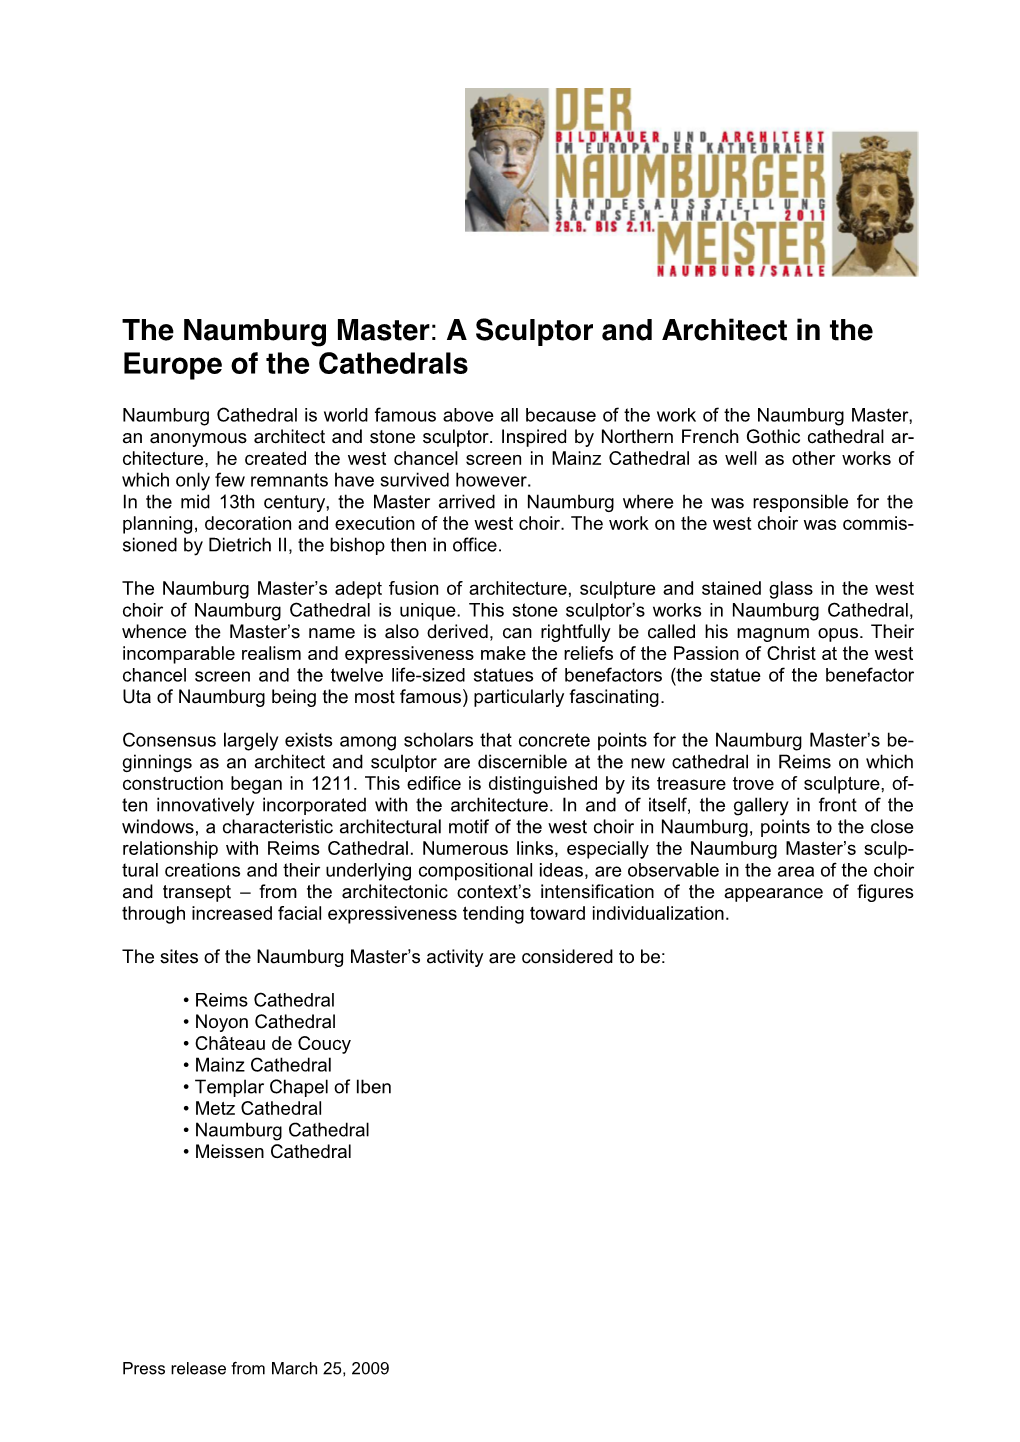 The Naumburg Master: a Sculptor and Architect in the Europe of the Cathedrals